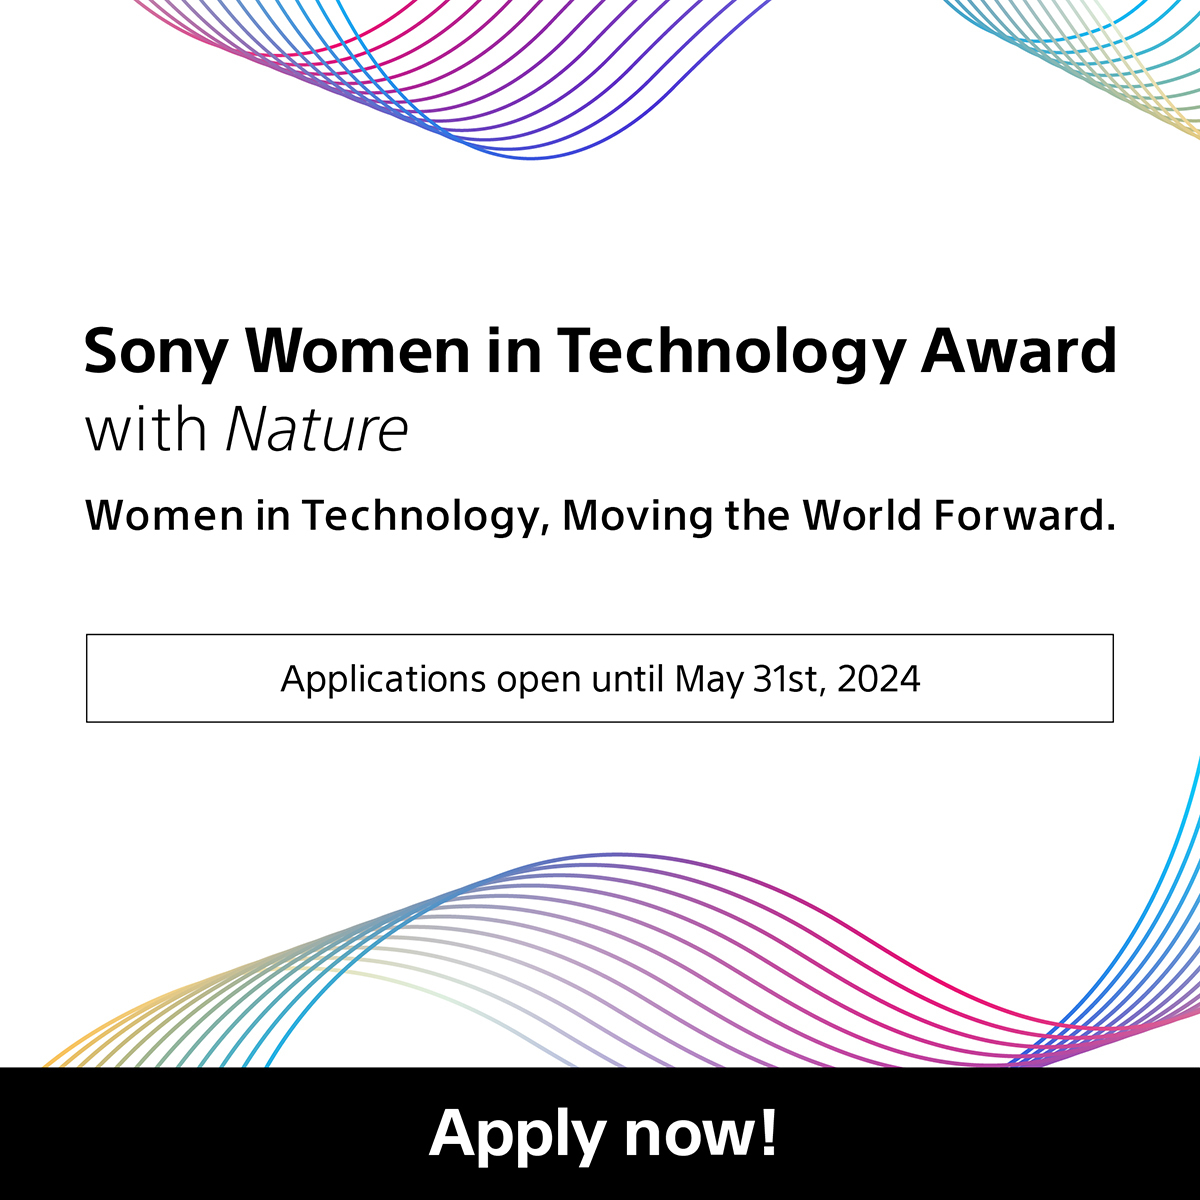 Announcing the “Sony Women in Technology Award with Nature”, honoring women who are making a positive impact through innovative research. Together, we aim to champion the women who are shaping future technology. Learn more: womenintechnology.sony.com #Sony #Nature #WomenInTech